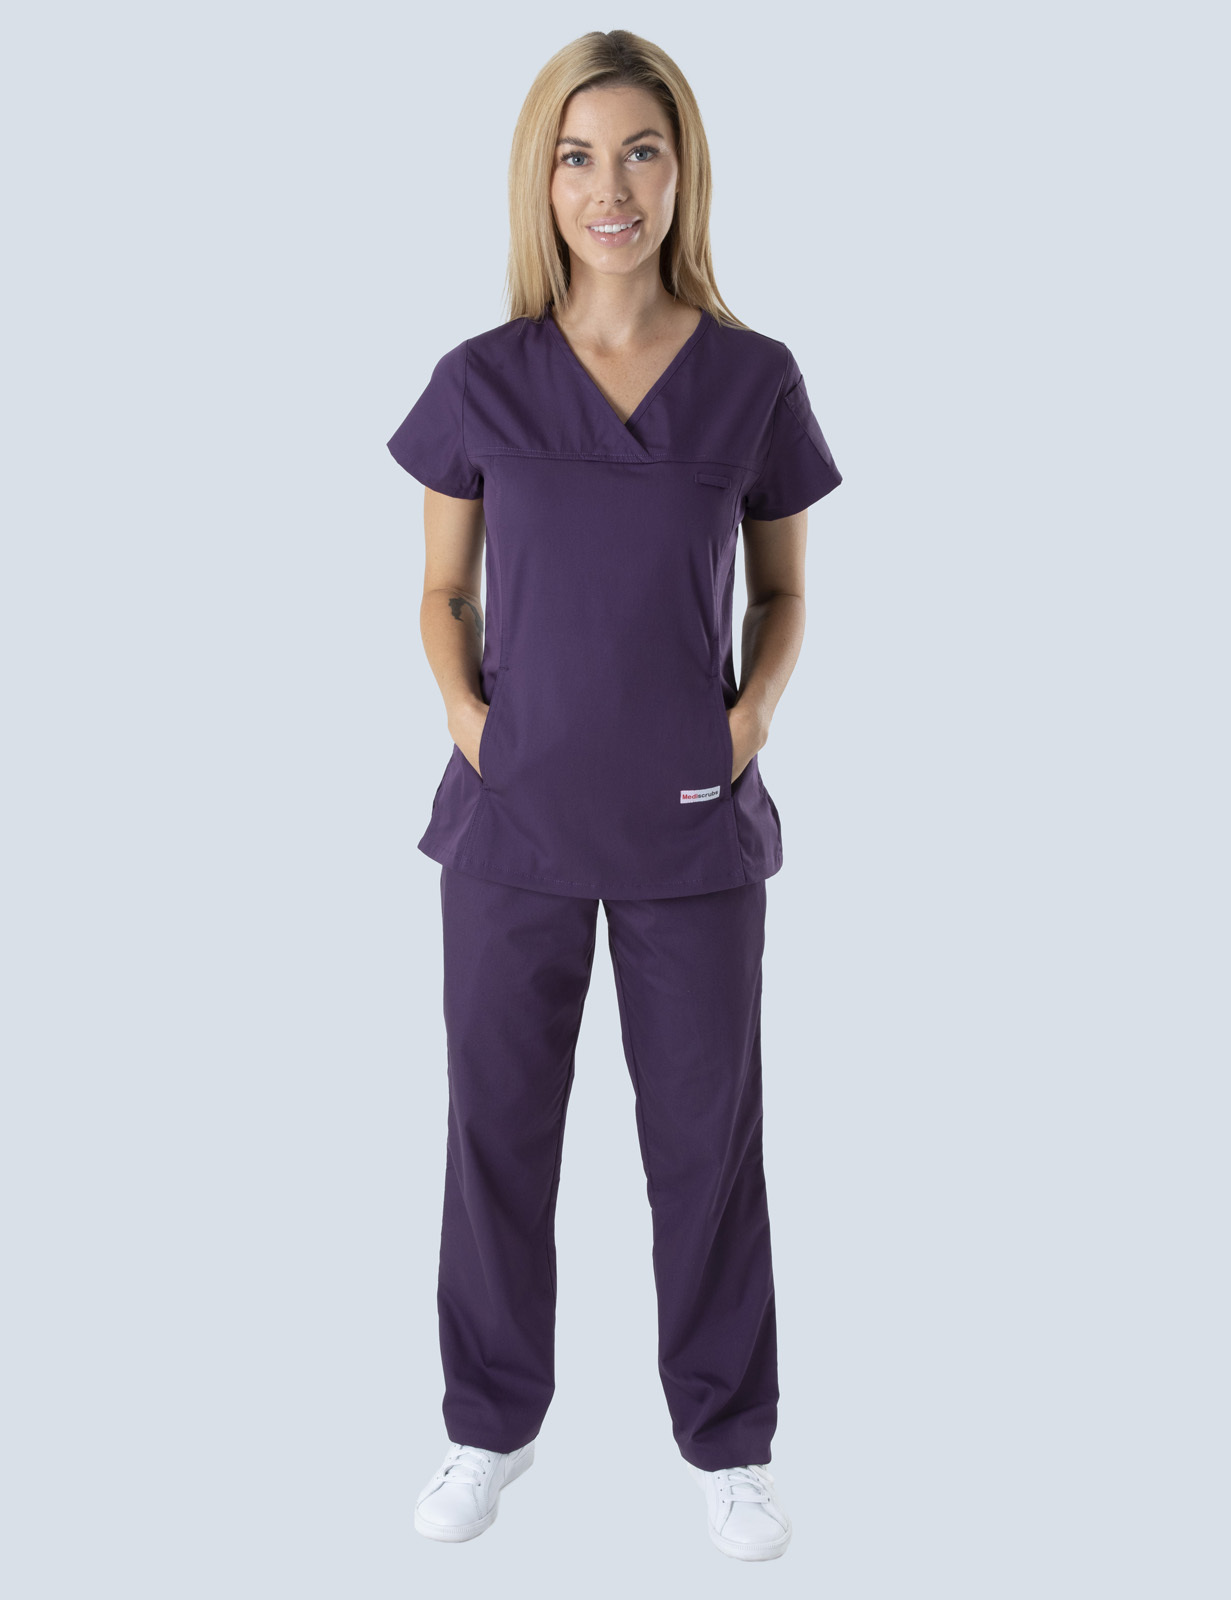 Nambour Hospital - Midwife (Women's Fit Solid Scrub Top and Cargo Pants in Aubergine incl Logos)